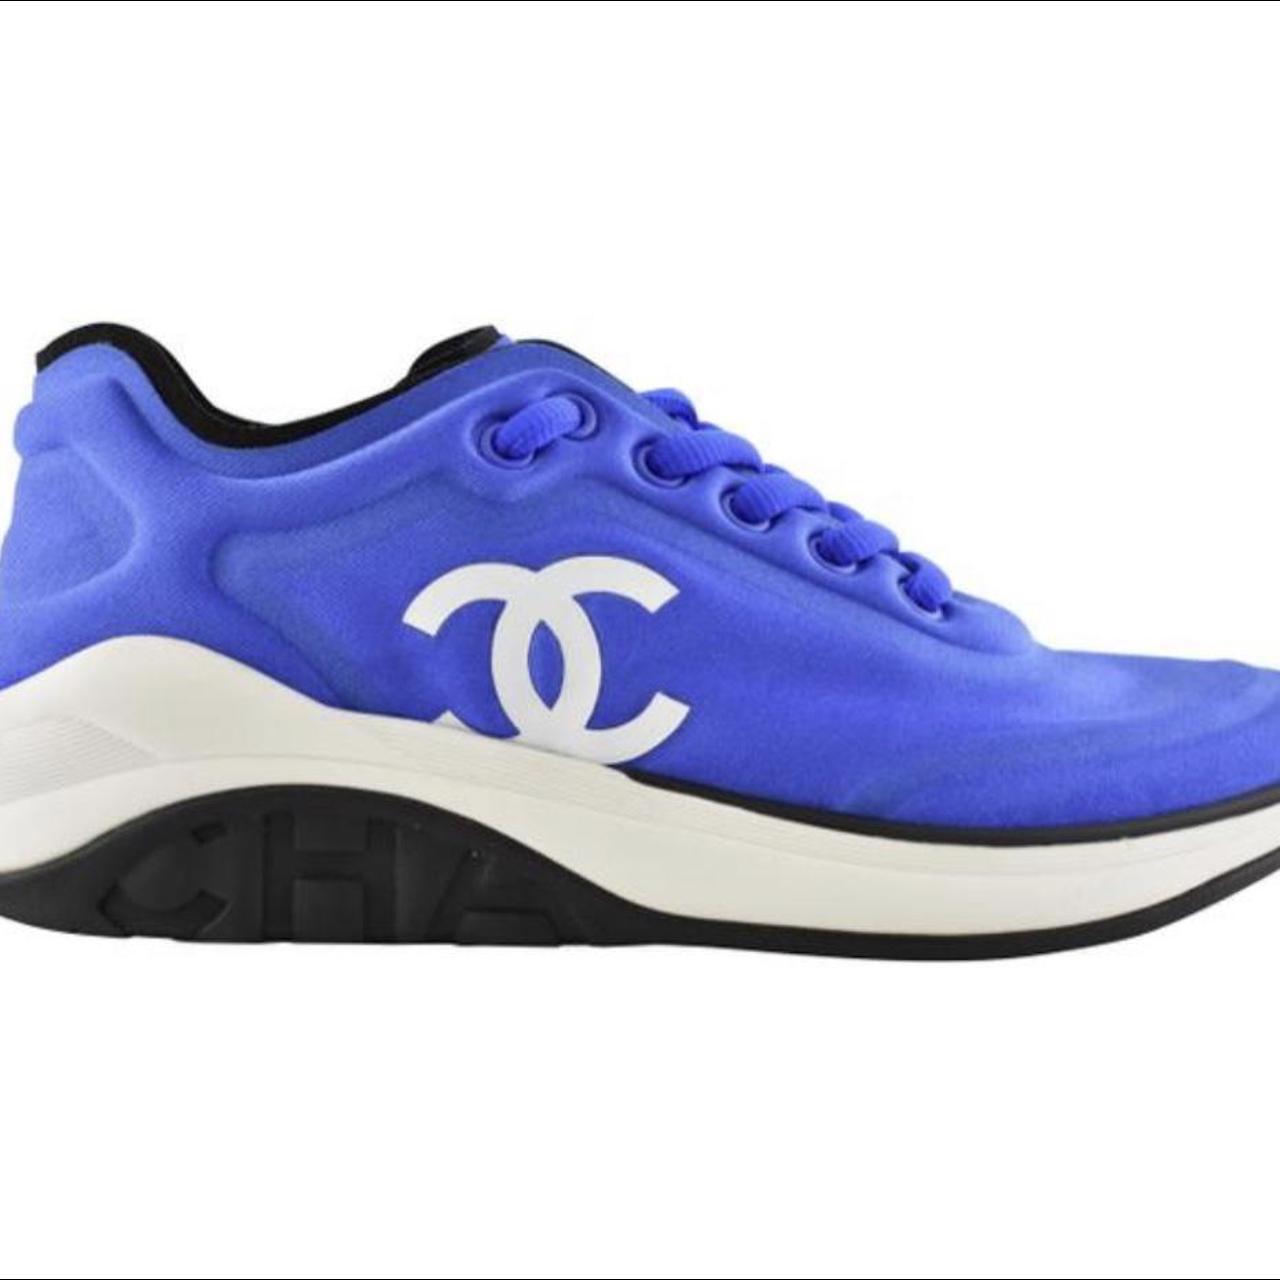 Authentic Chanel Blue sneakers size 11/41 but please